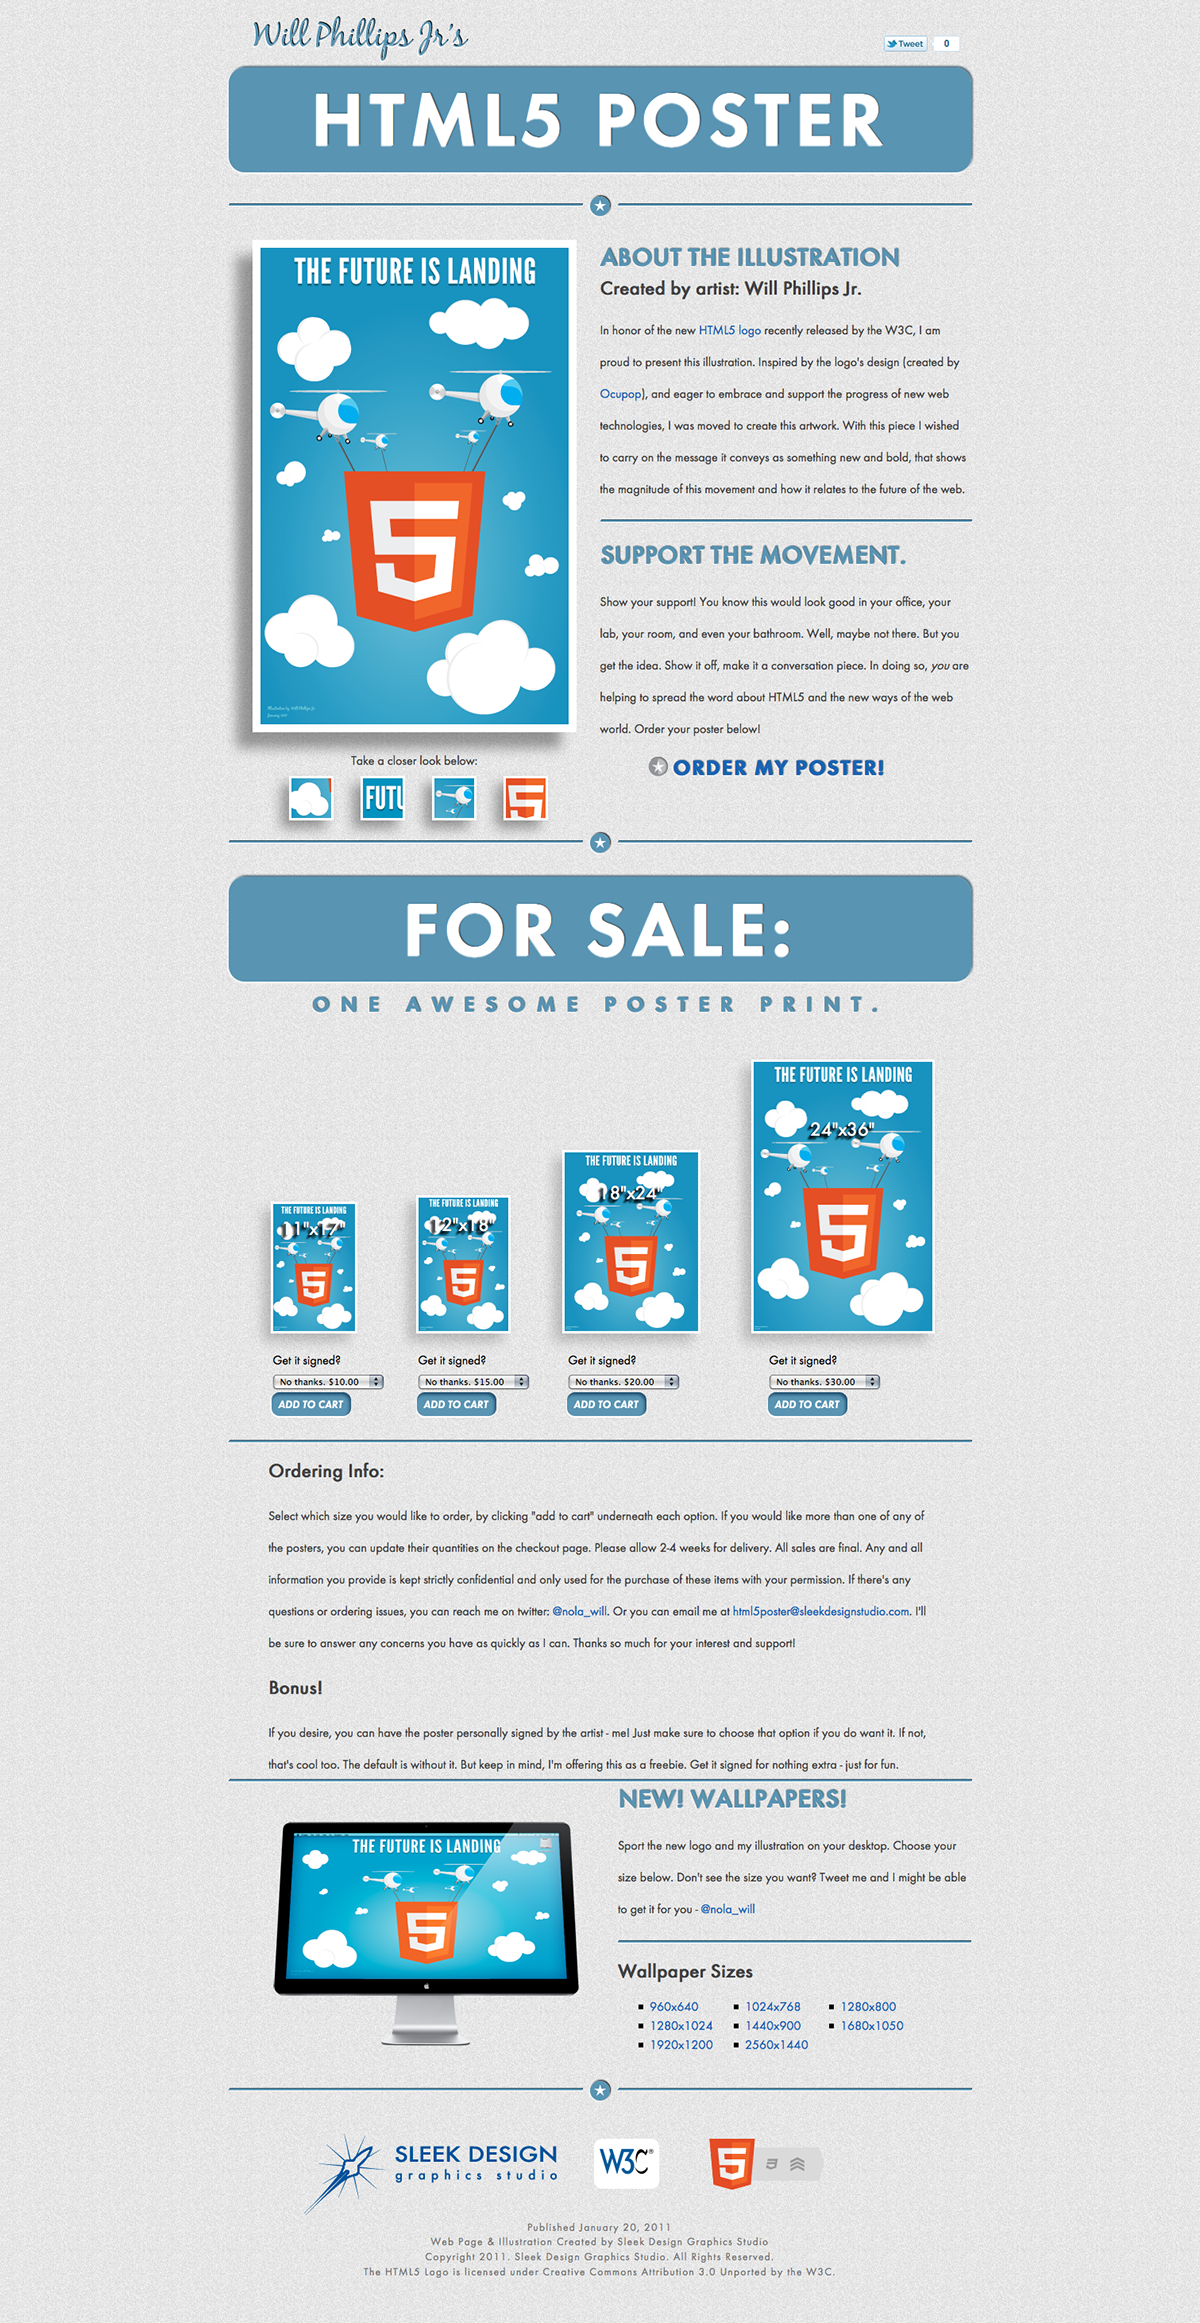 html5 poster art Illustrator graphic art graphics helicopter future clouds html5 logo w3c Sleek Design Will Phillips Jr